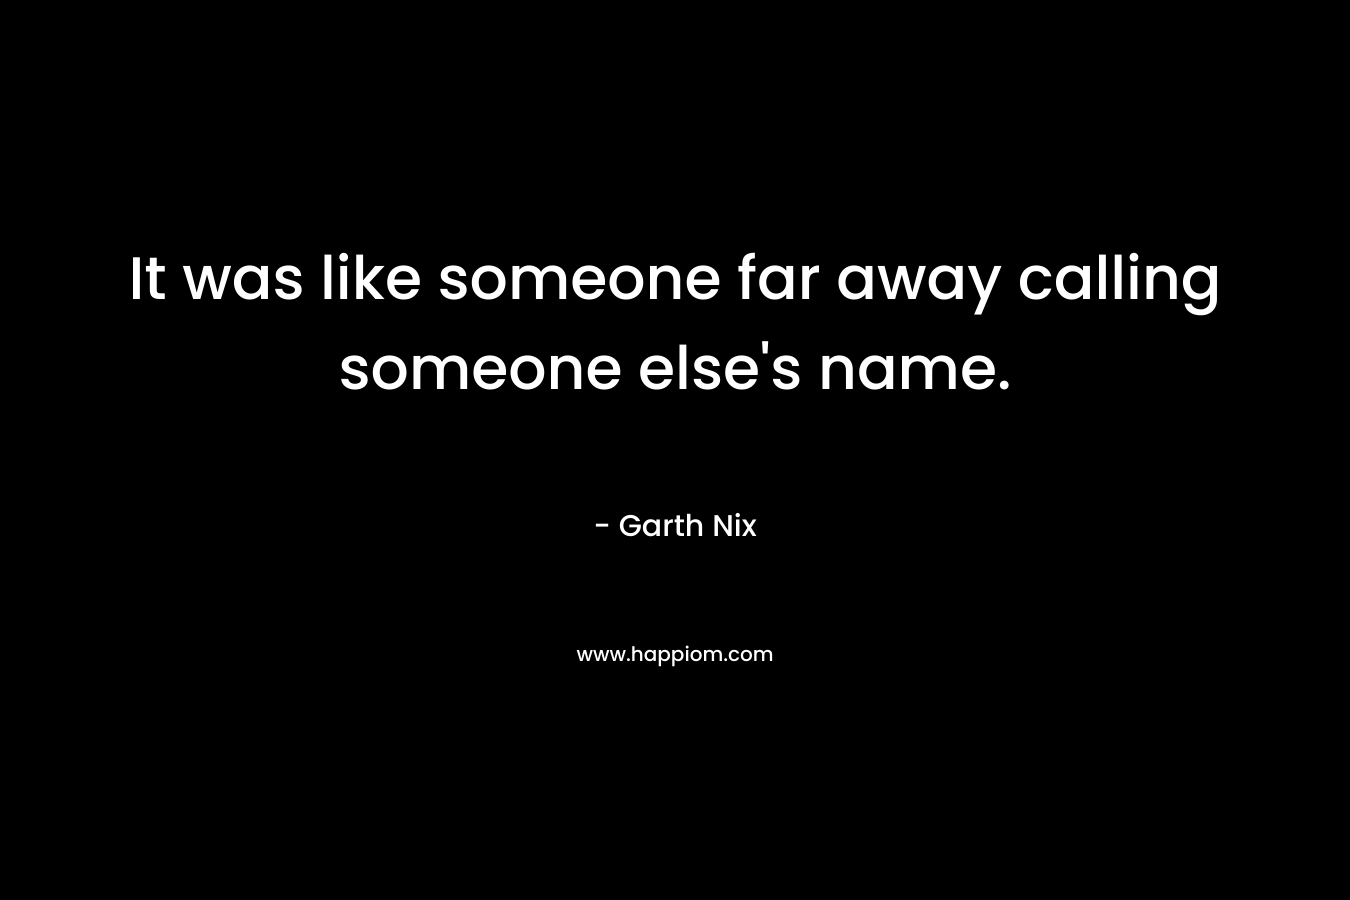 It was like someone far away calling someone else's name.